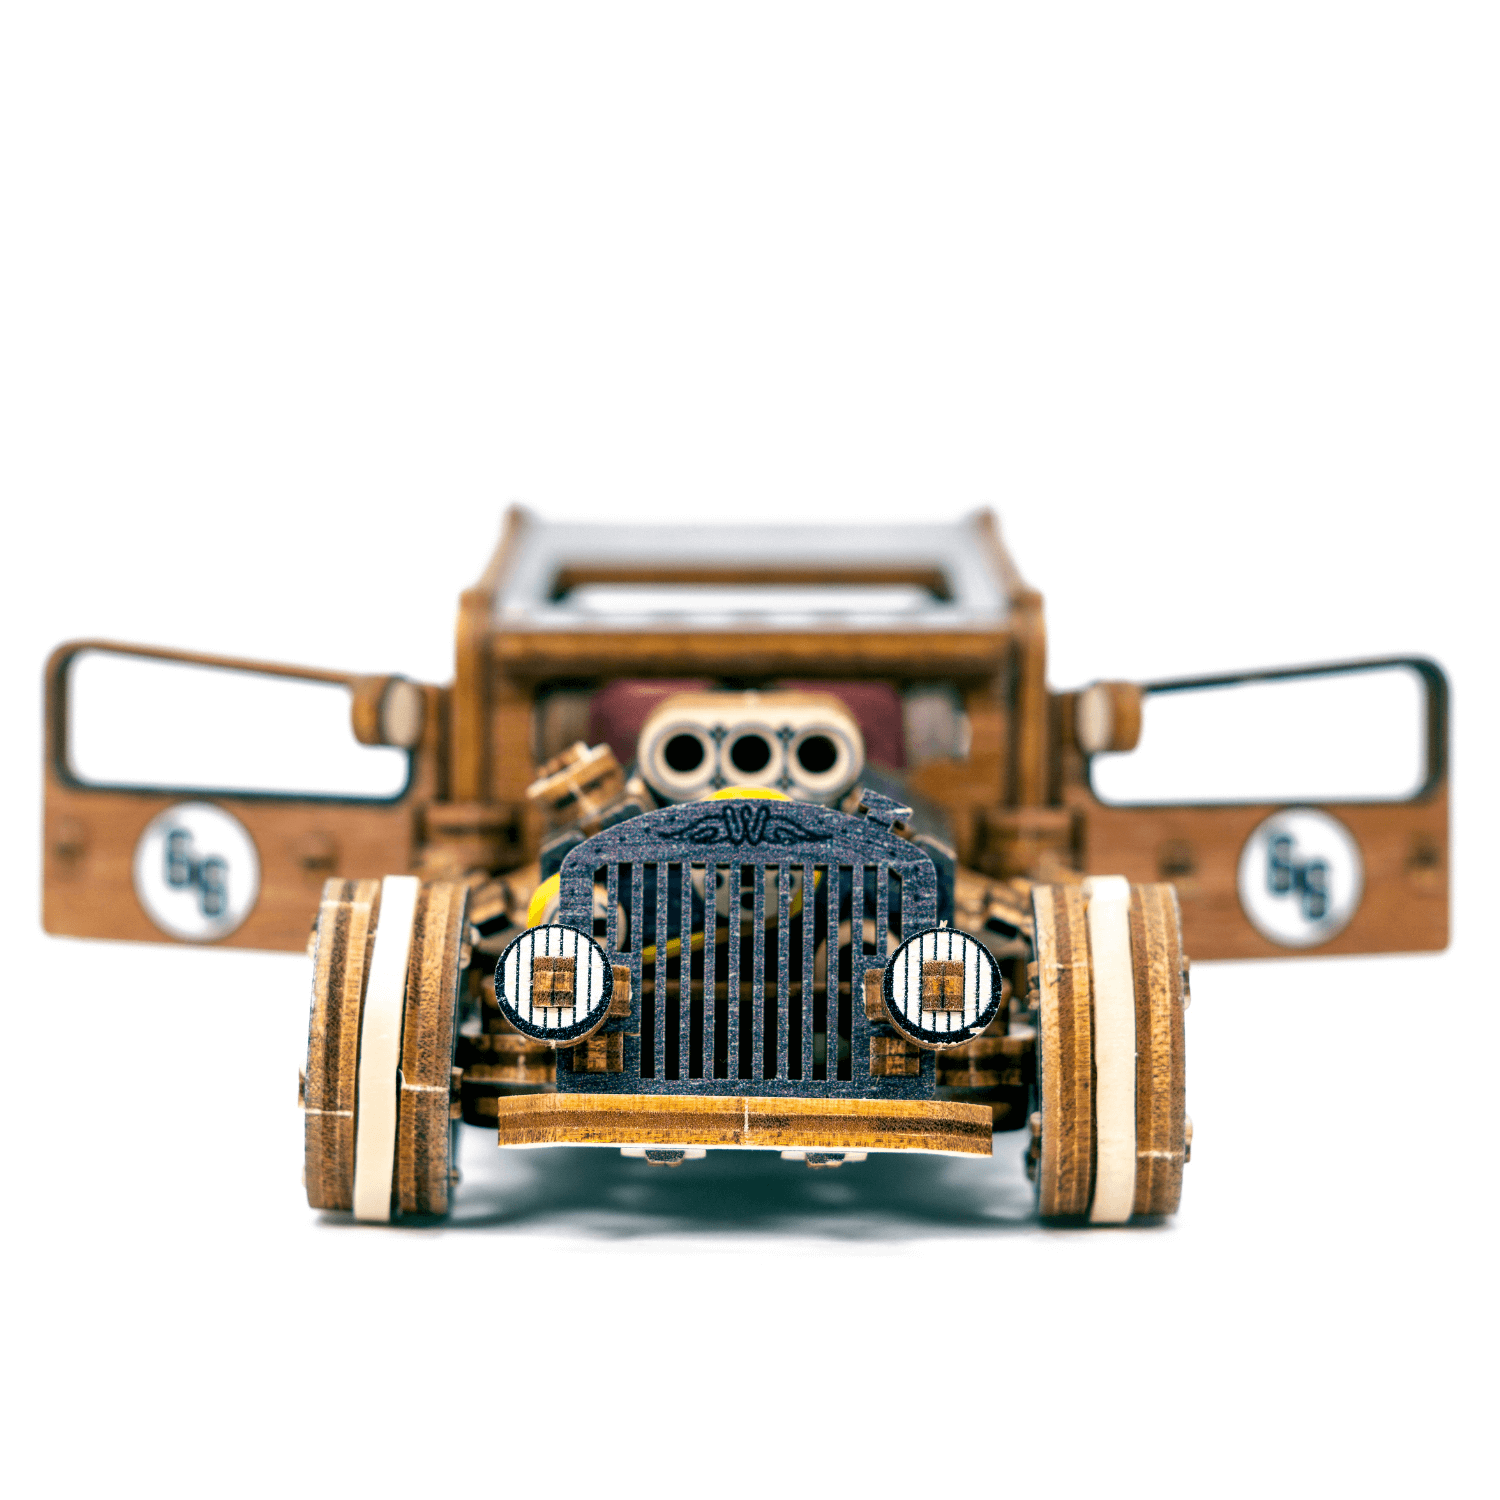 Hot Rod | Limited Edition